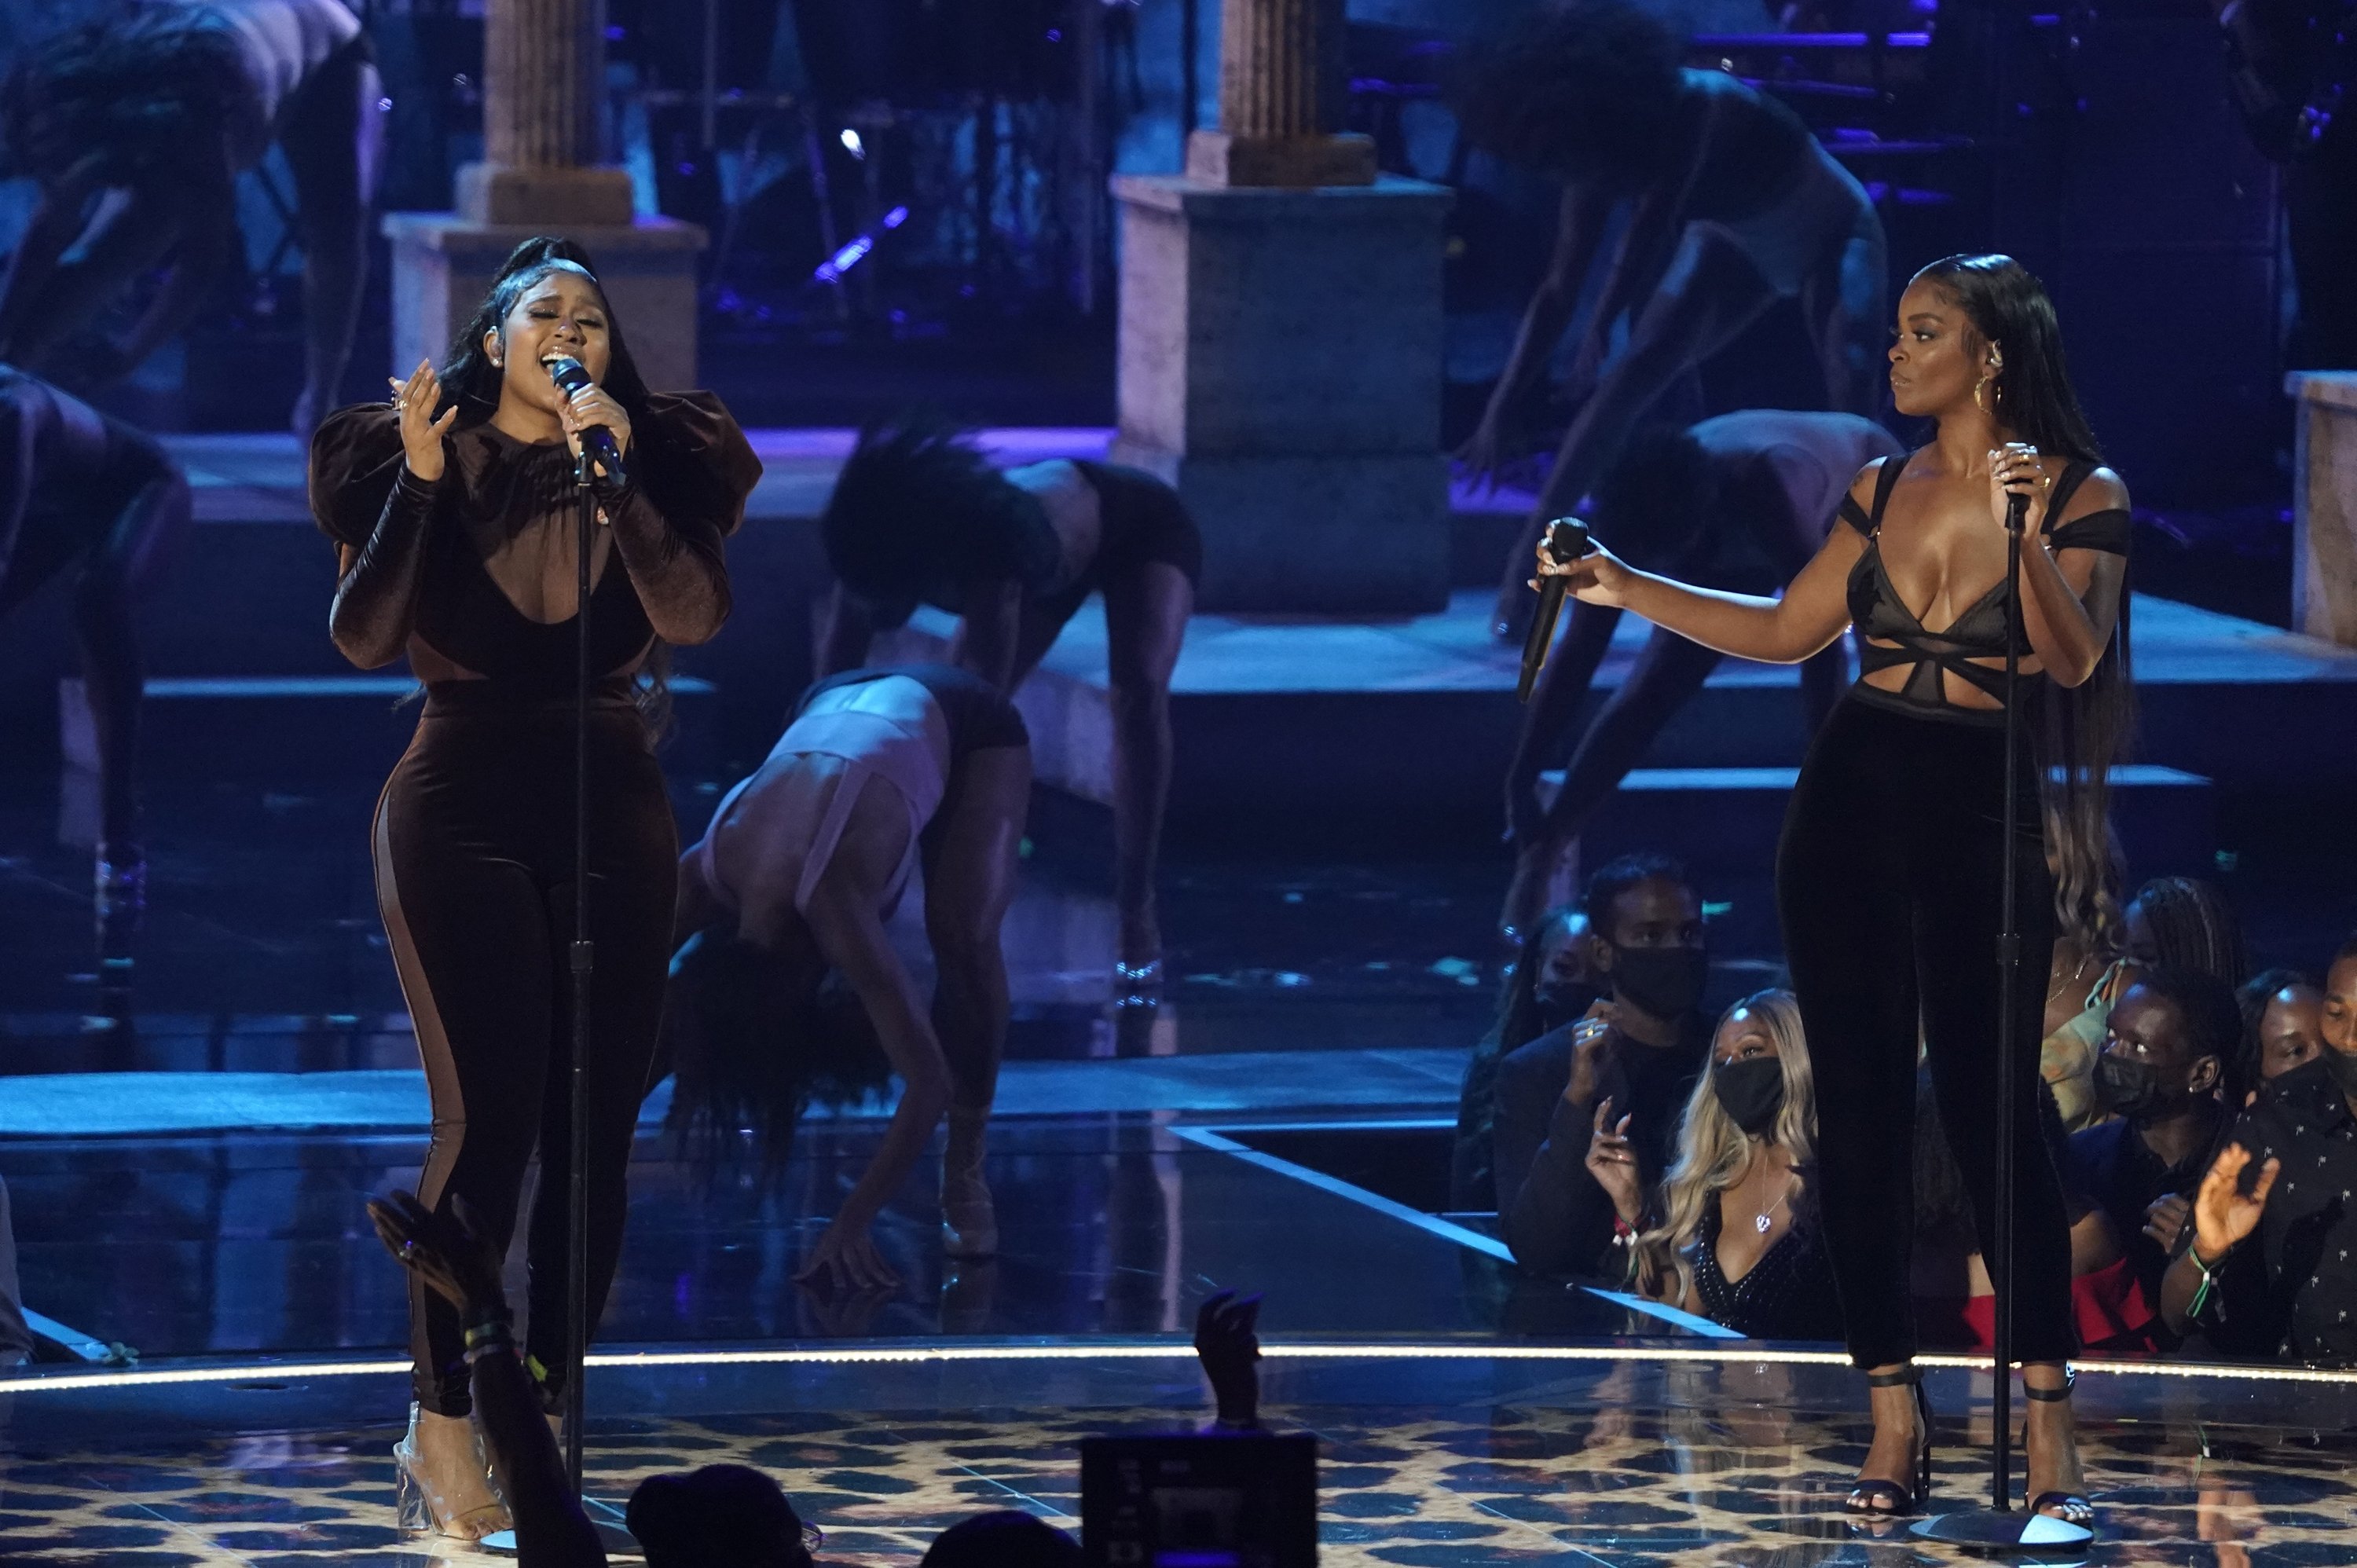 Jazmine Sullivan (L), and JT, of City Girls, perform at the BET Awards at the Microsoft Theater in Los Angeles, U.S., June 27, 2021. (AP Photo)